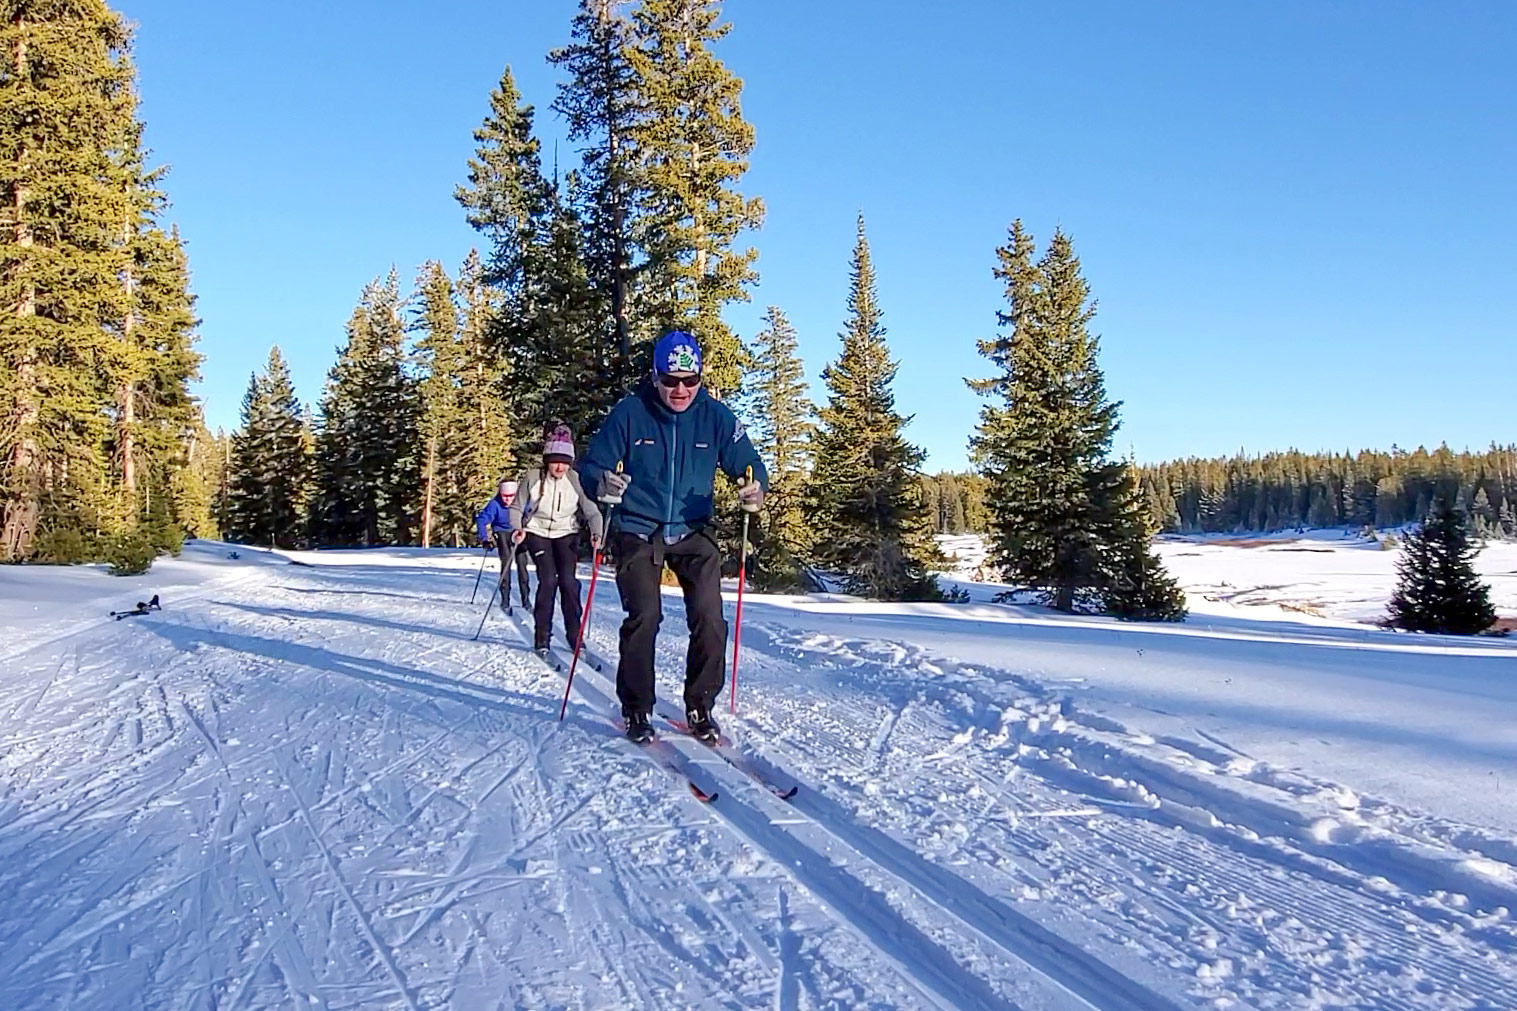 Scotty McGee, PSIA-certified instructor, with cross country ski students